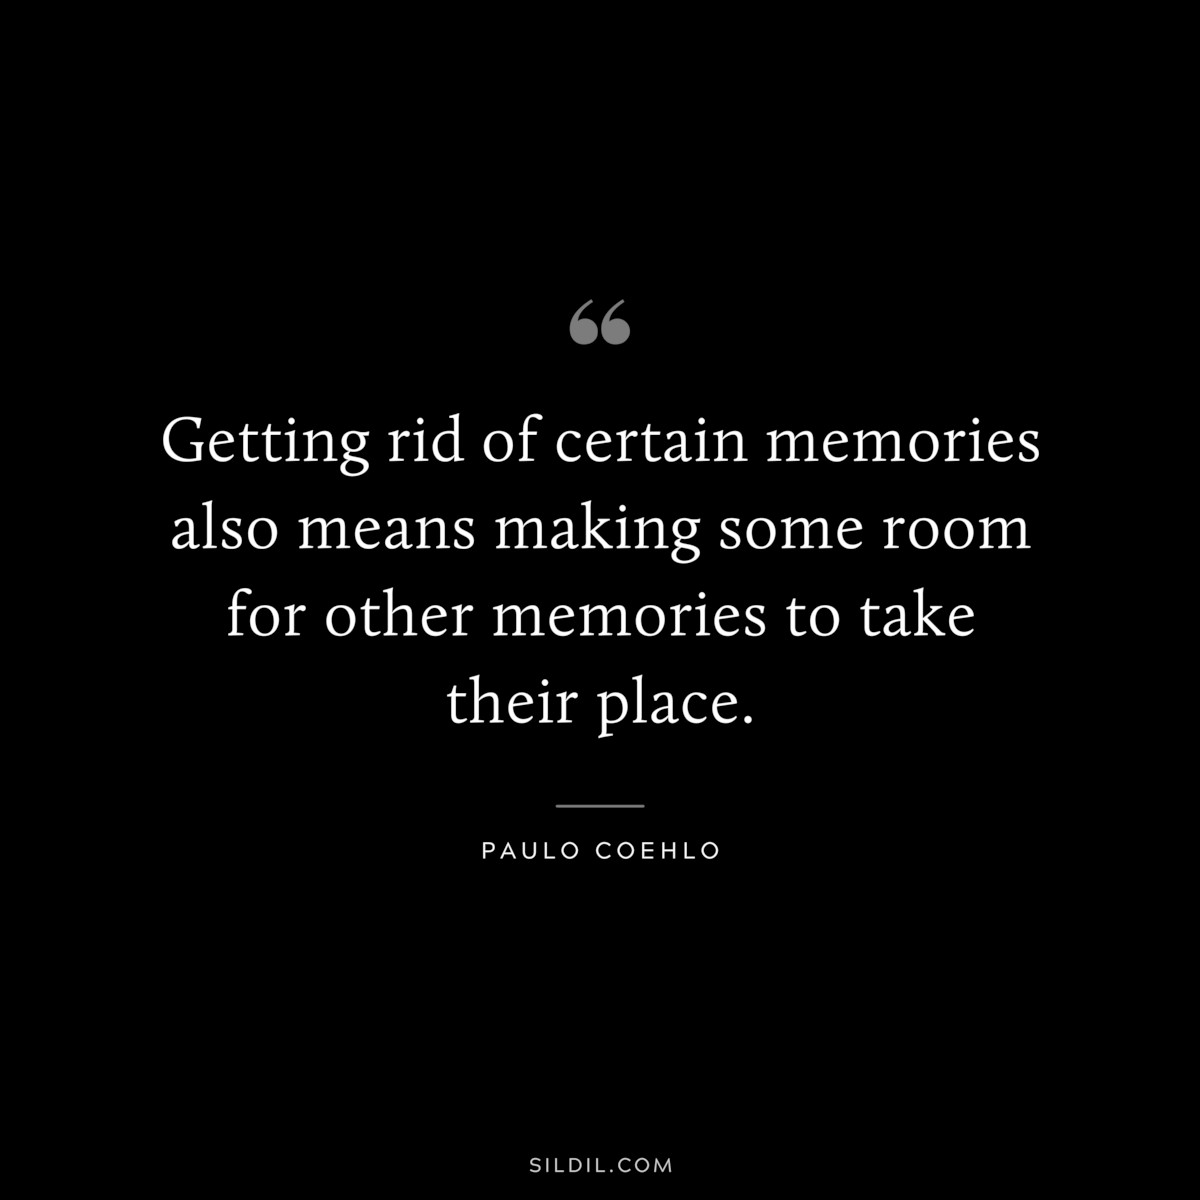 Getting rid of certain memories also means making some room for other memories to take their place. ― Paulo Coehlo